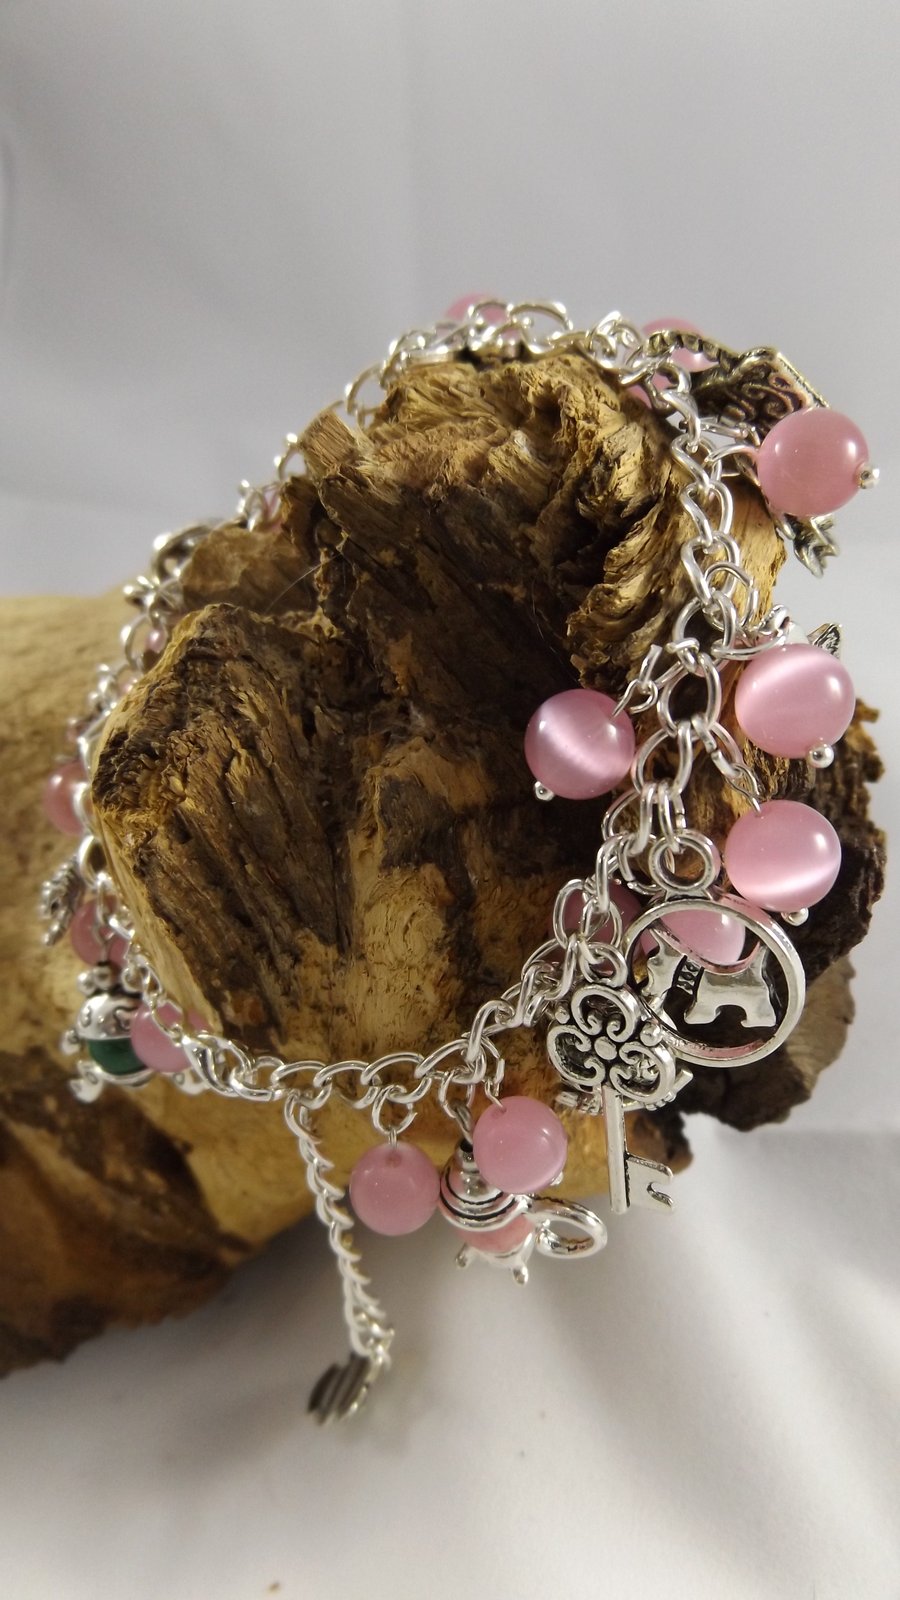 Silver plated charm bracelet with pink cats eye beads